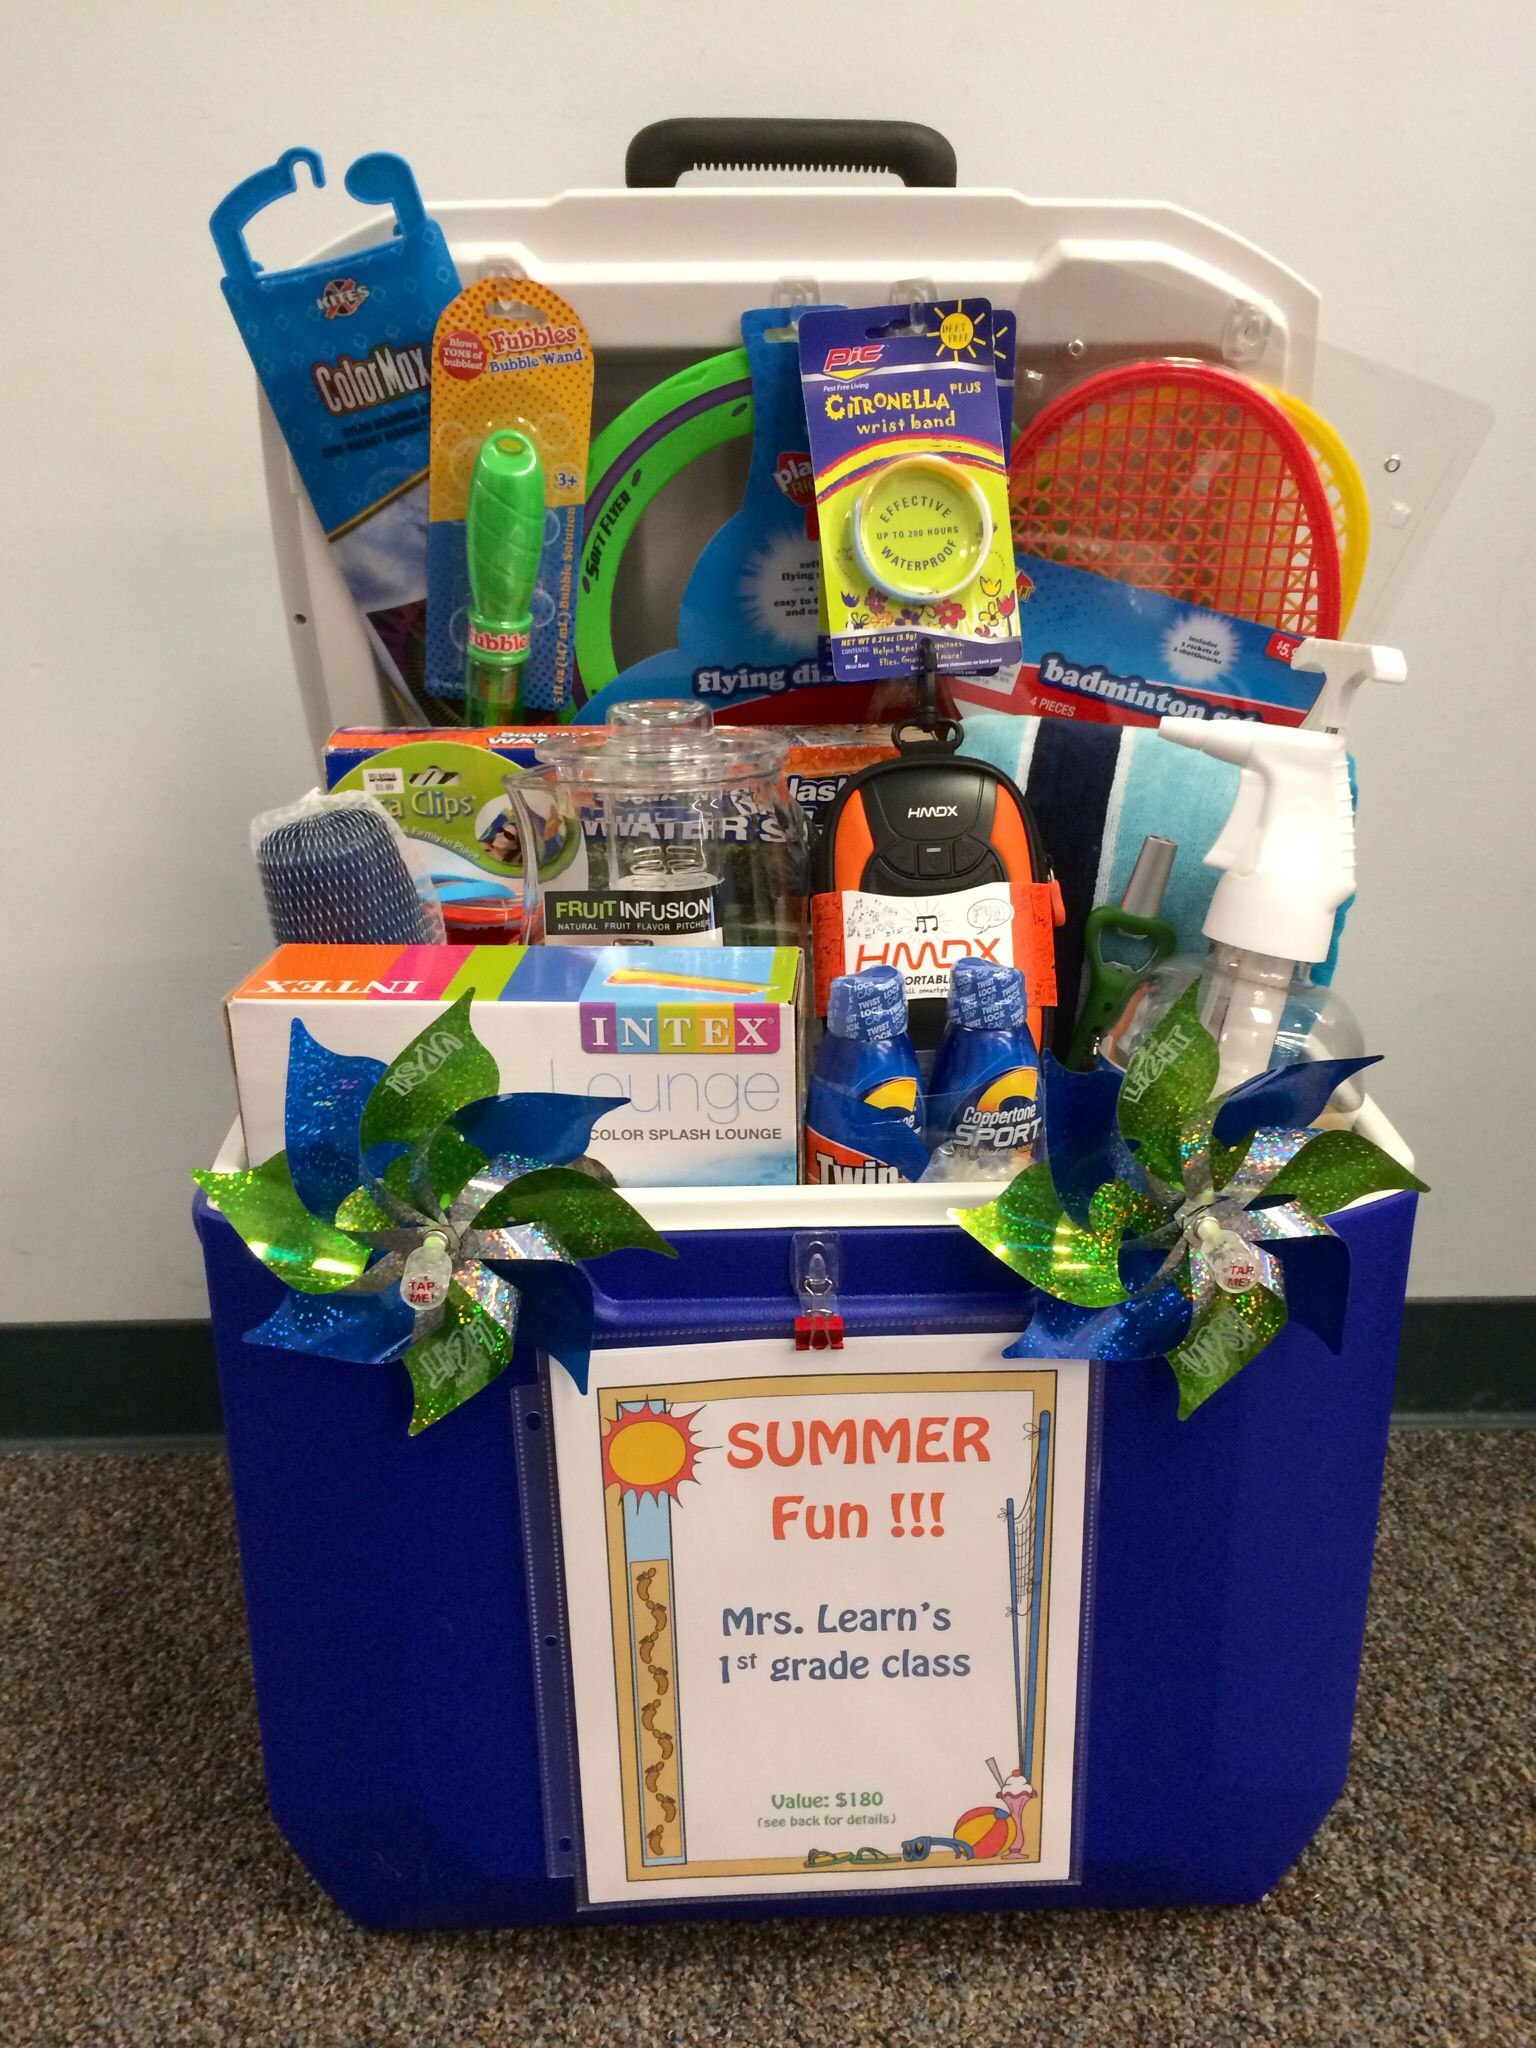 Great Gift Basket Ideas
 Silent auction "basket" for school fundraiser using ice